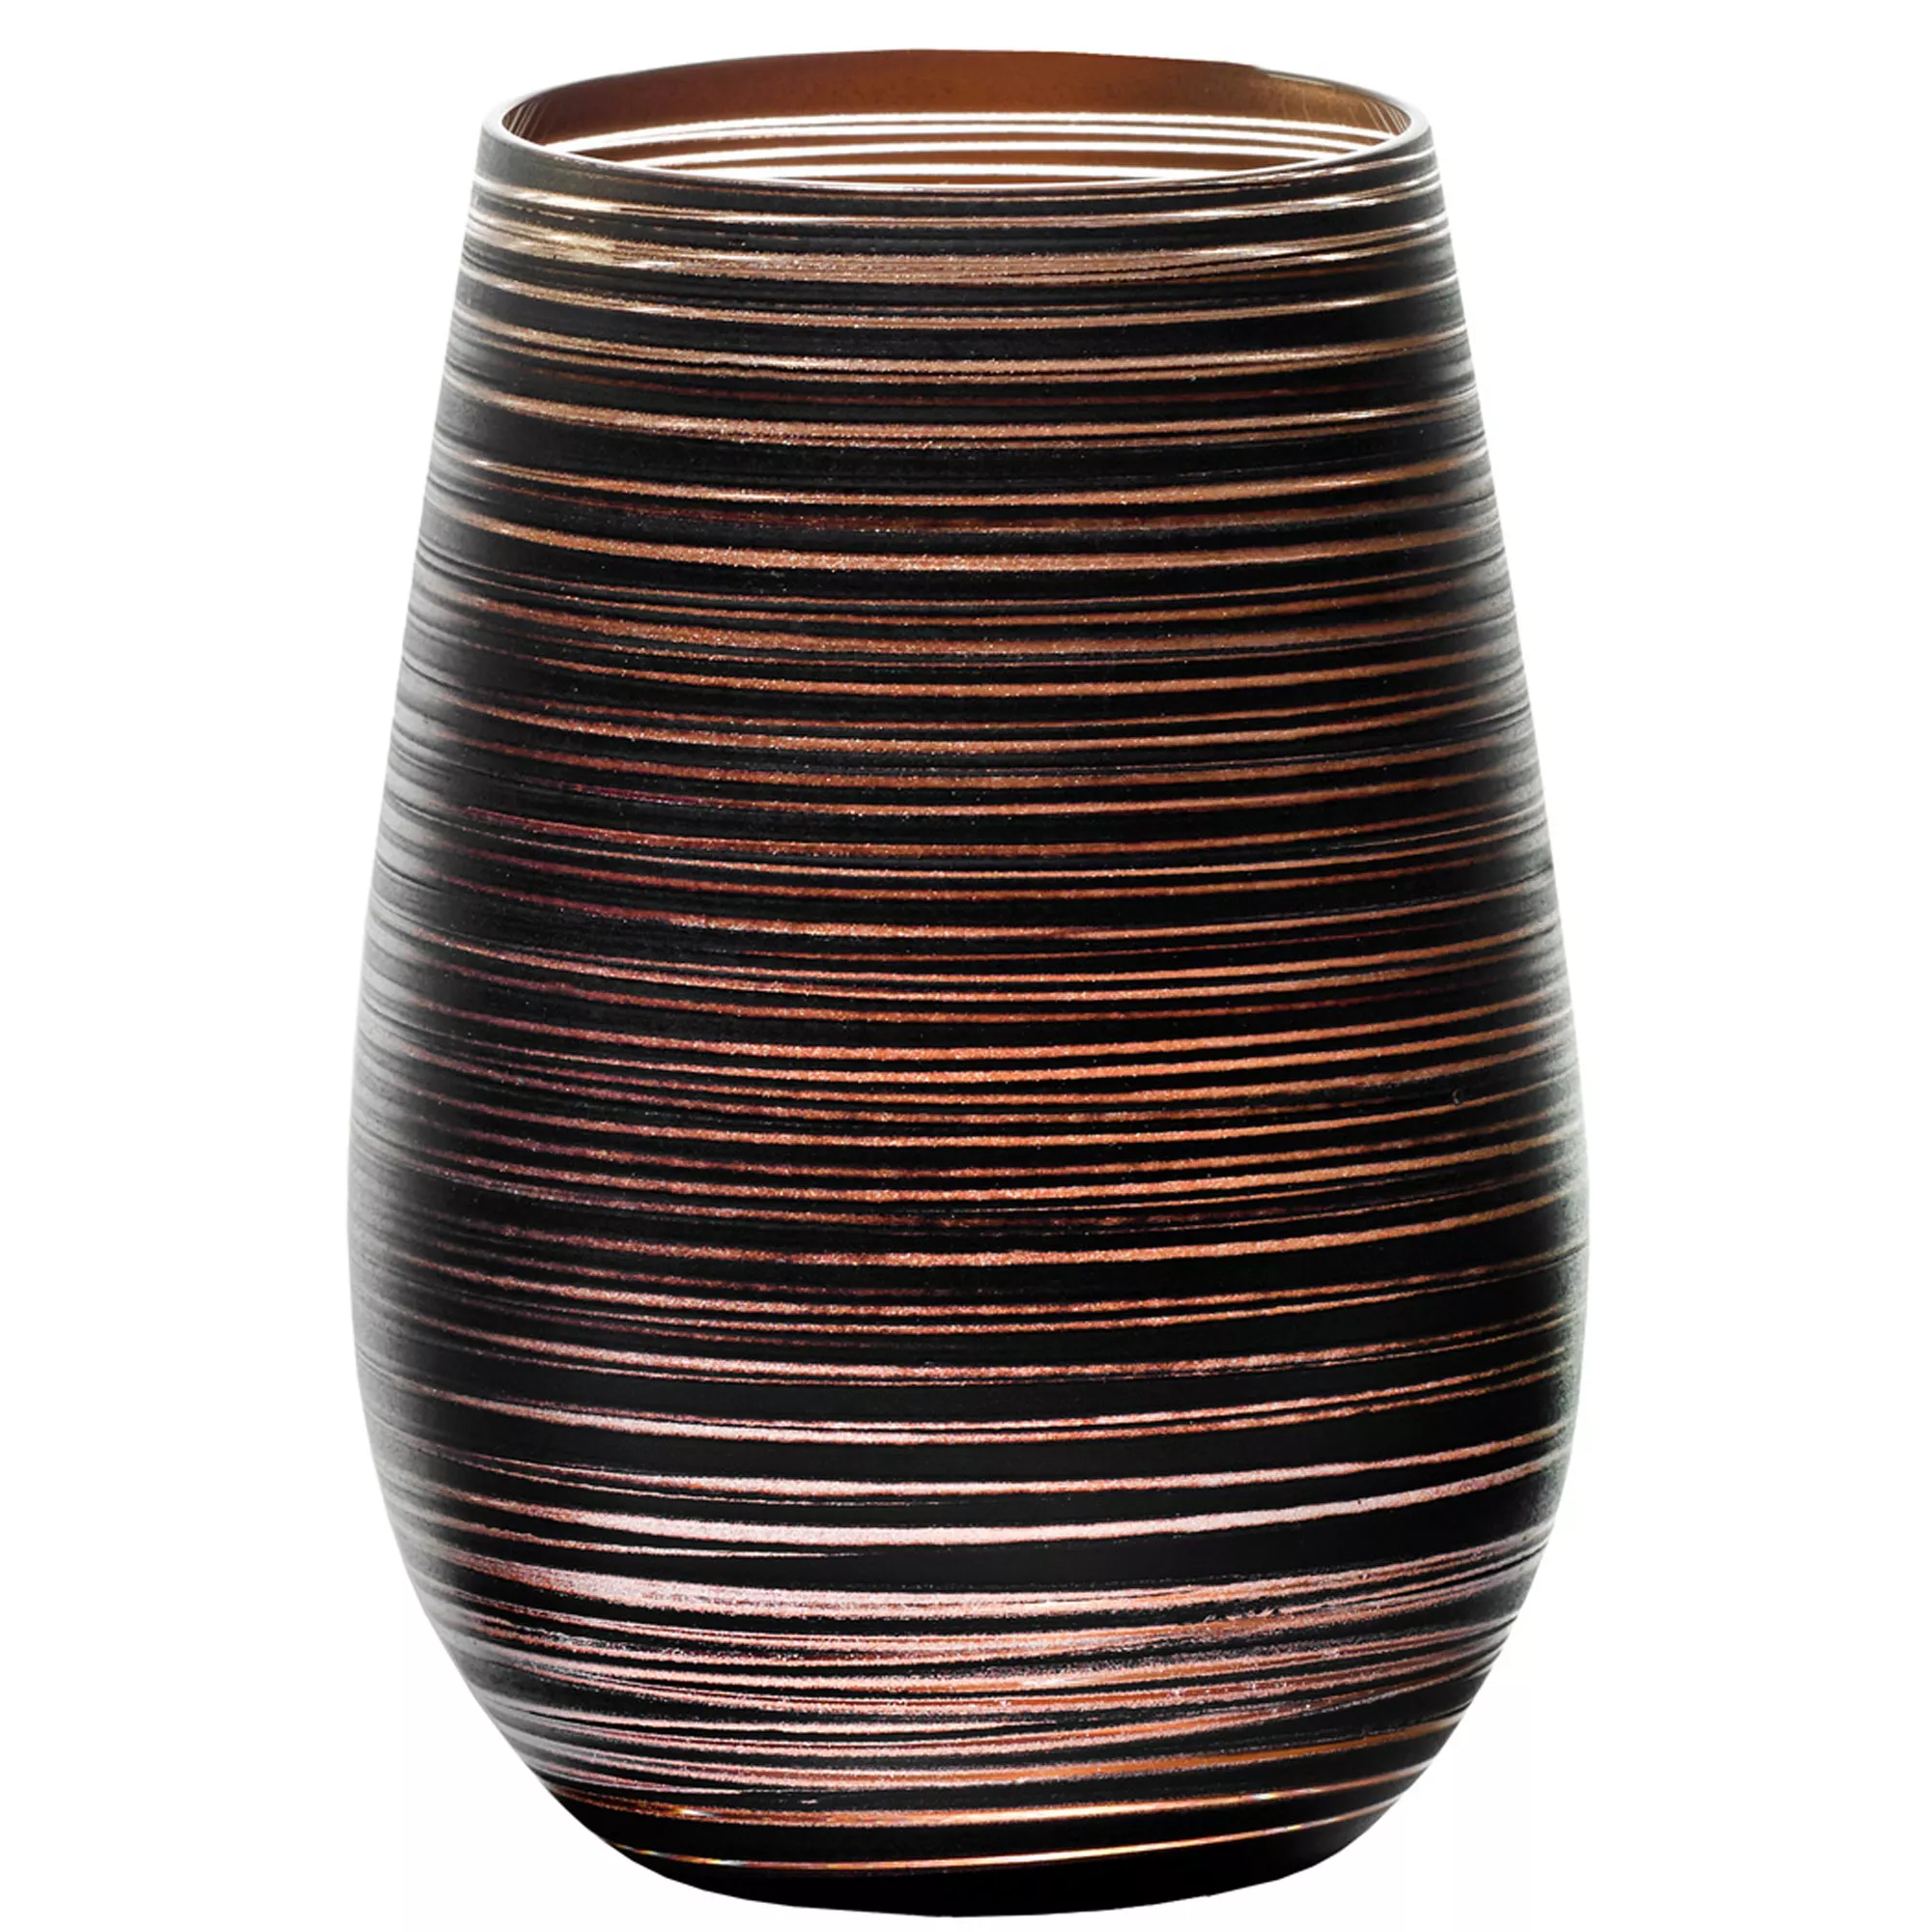 Tumbler from the series (1 Stölzle - \'Twister\' black-bronze by in 465ml